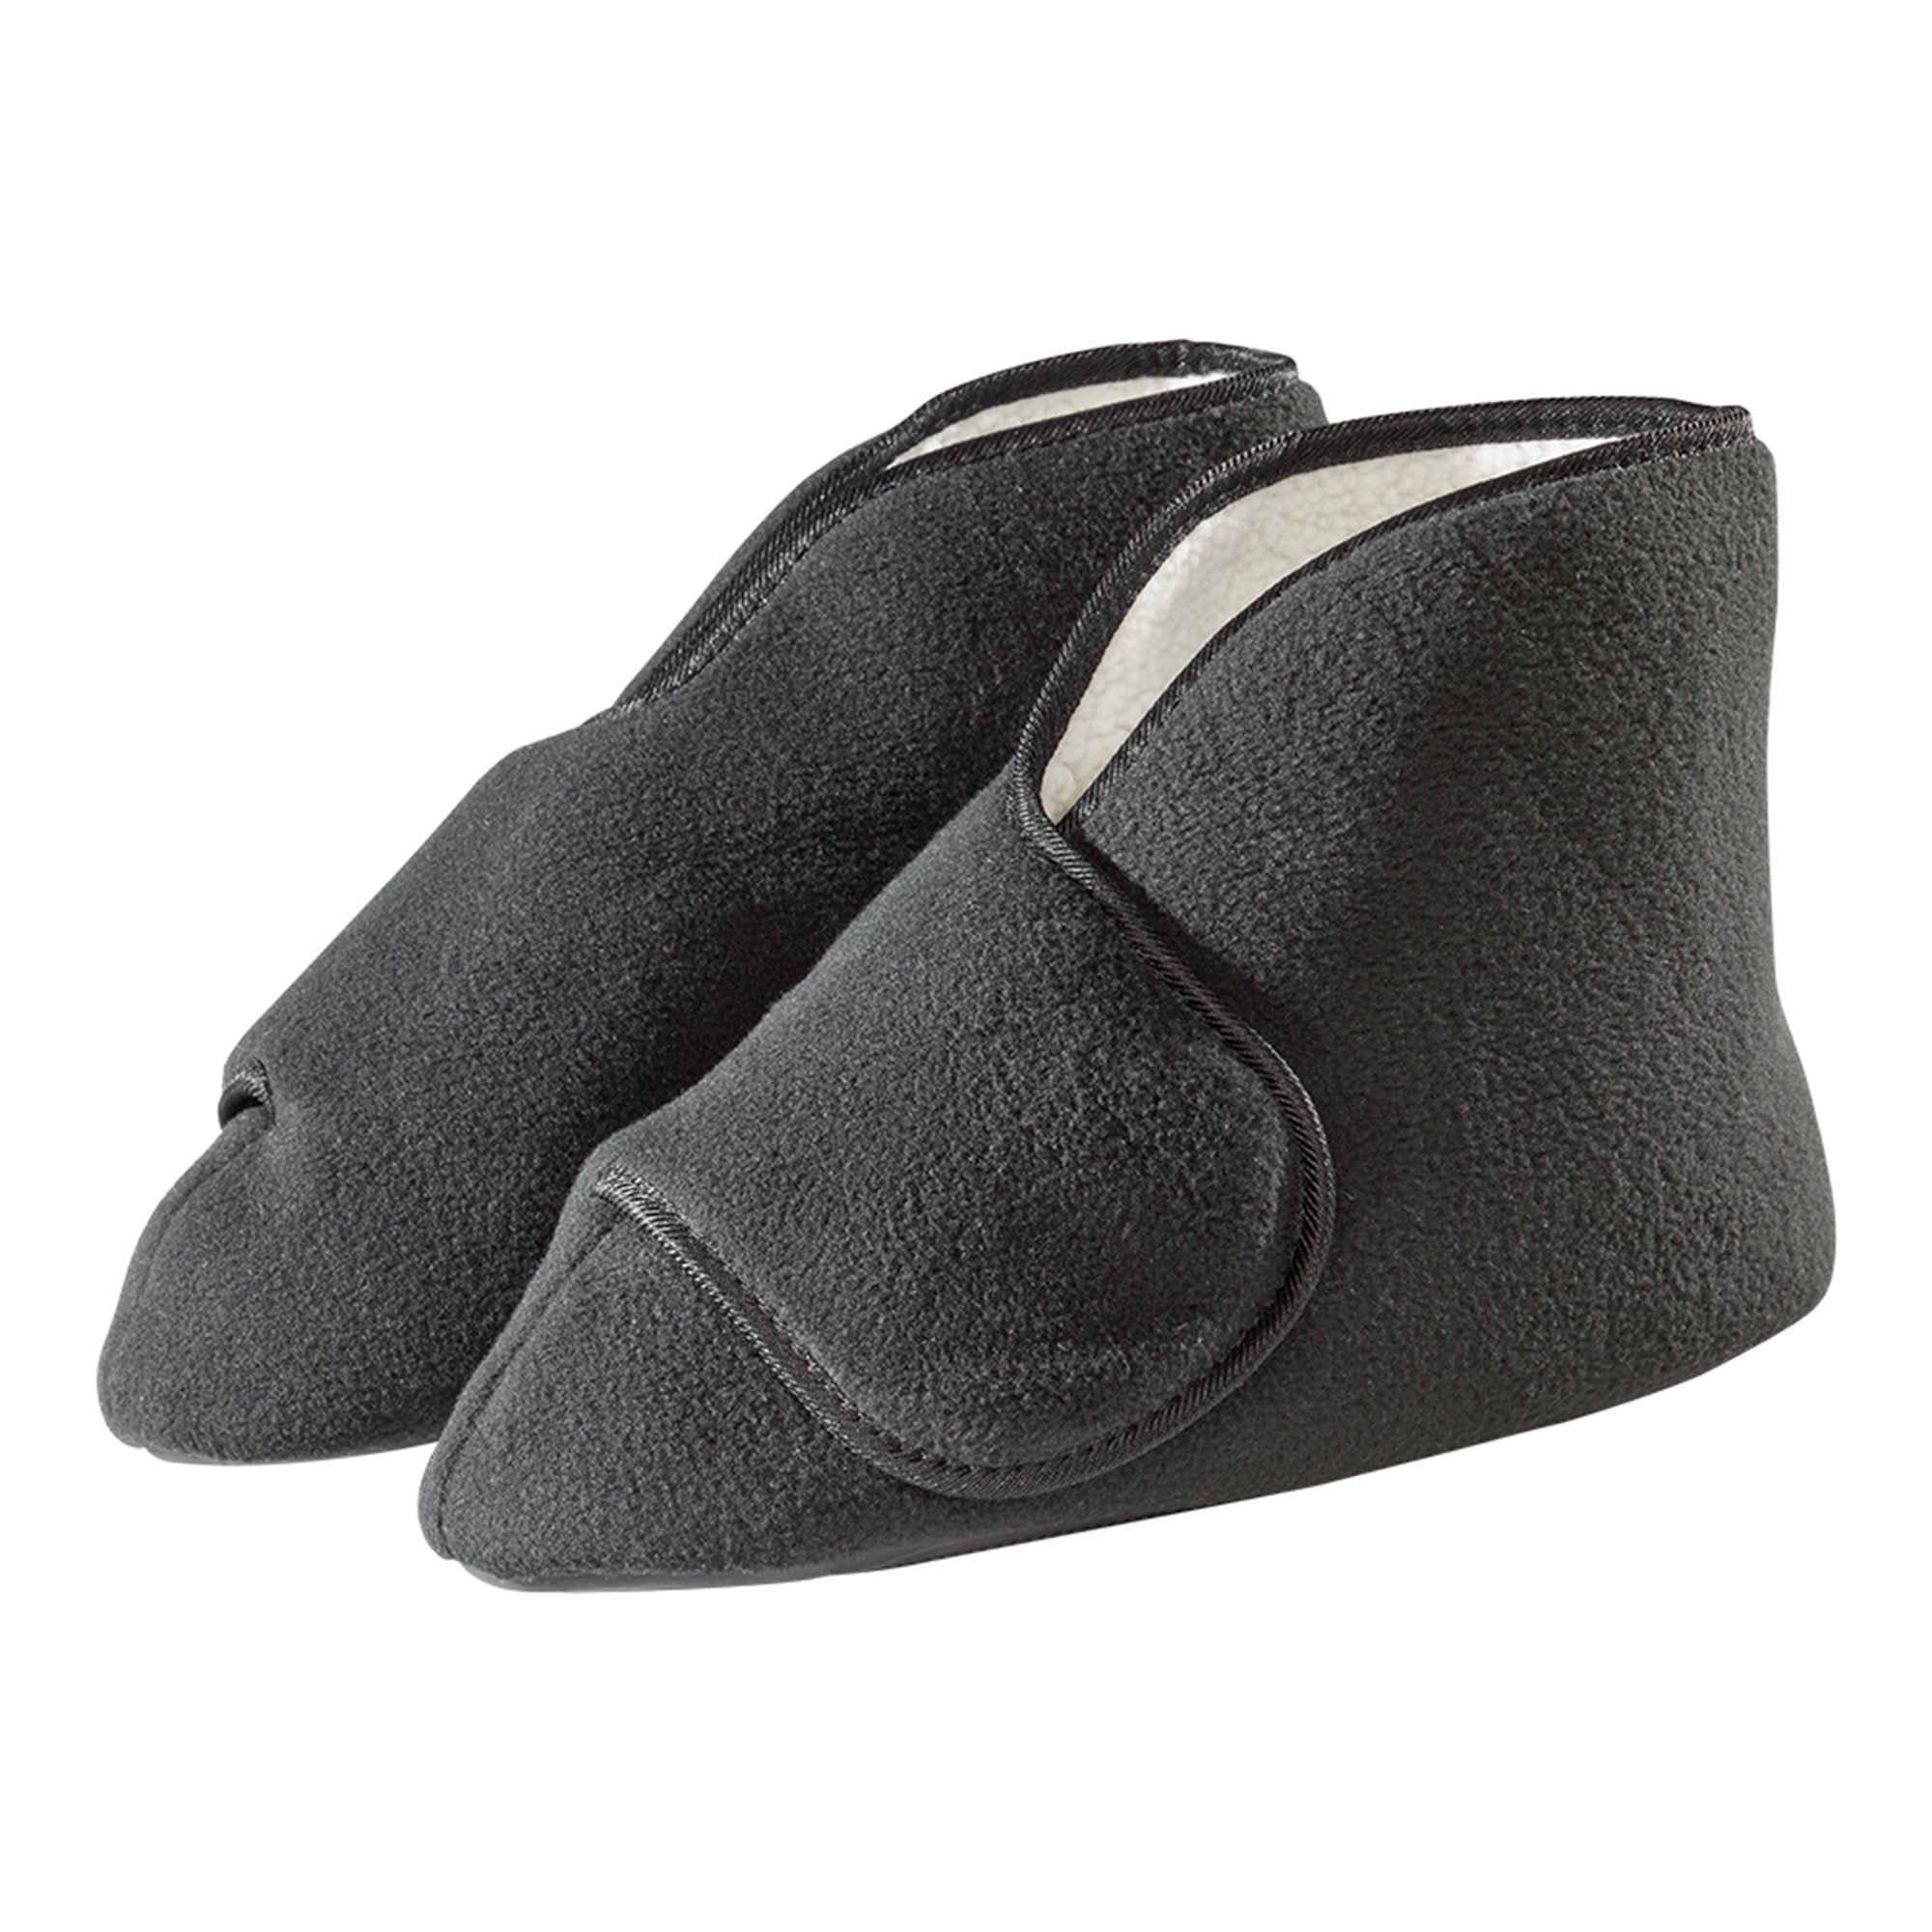 Silverts? Deep and Wide Diabetic Bootie Slippers, Black